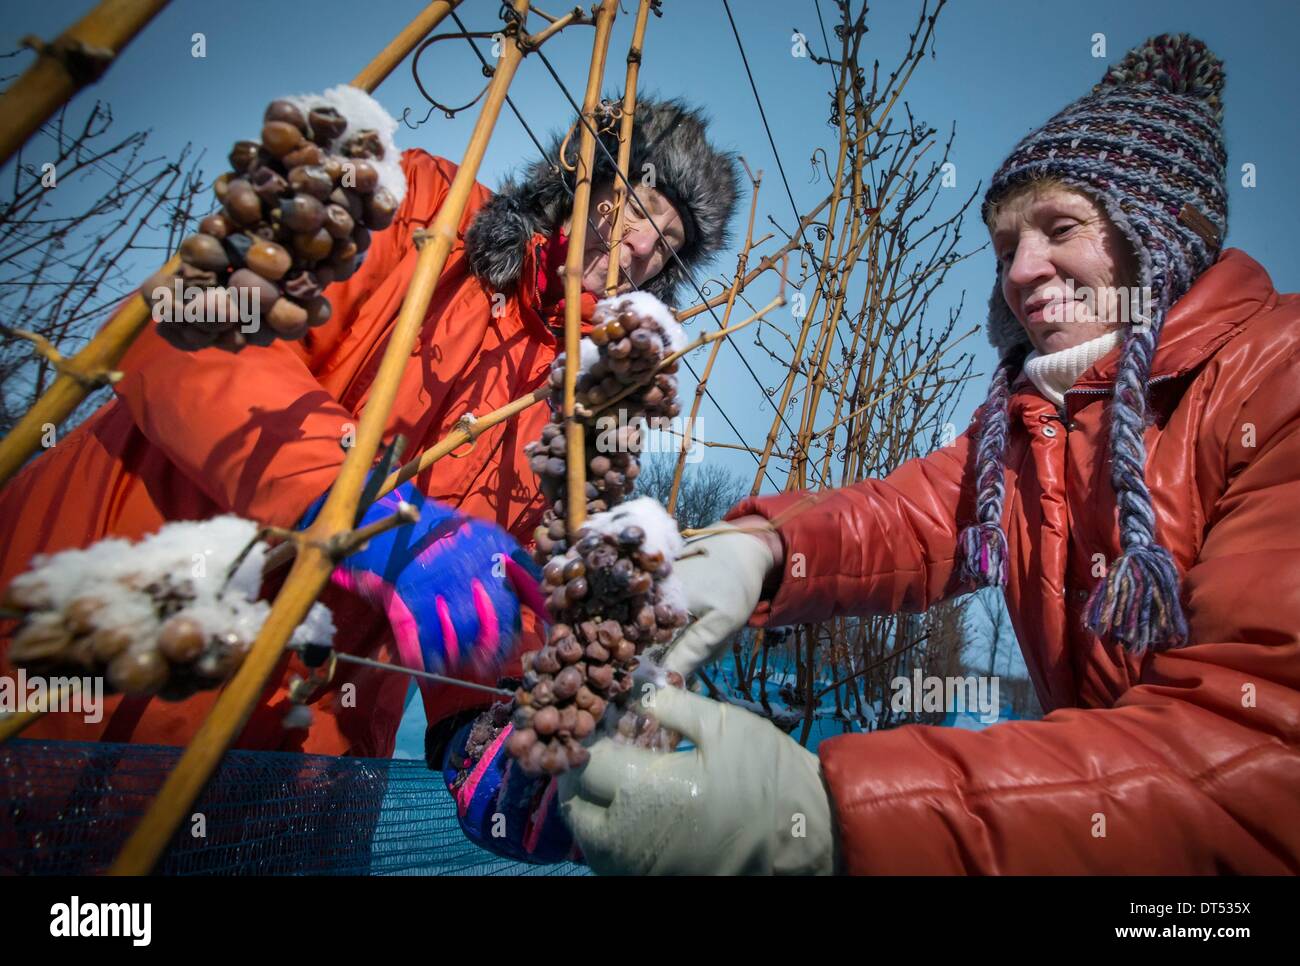 Heidrun Schoenherr (L) and Christina Zahn from Zahn vineyards harvest Riesling grapes for the ice wine on the Dachsberg in Kaatchen, Germany, 26 January 2014. The temperature has to be at least minus seven Celsius to harves the grapes to make ice wine. Photo: MICHAEL REICHEL Stock Photo